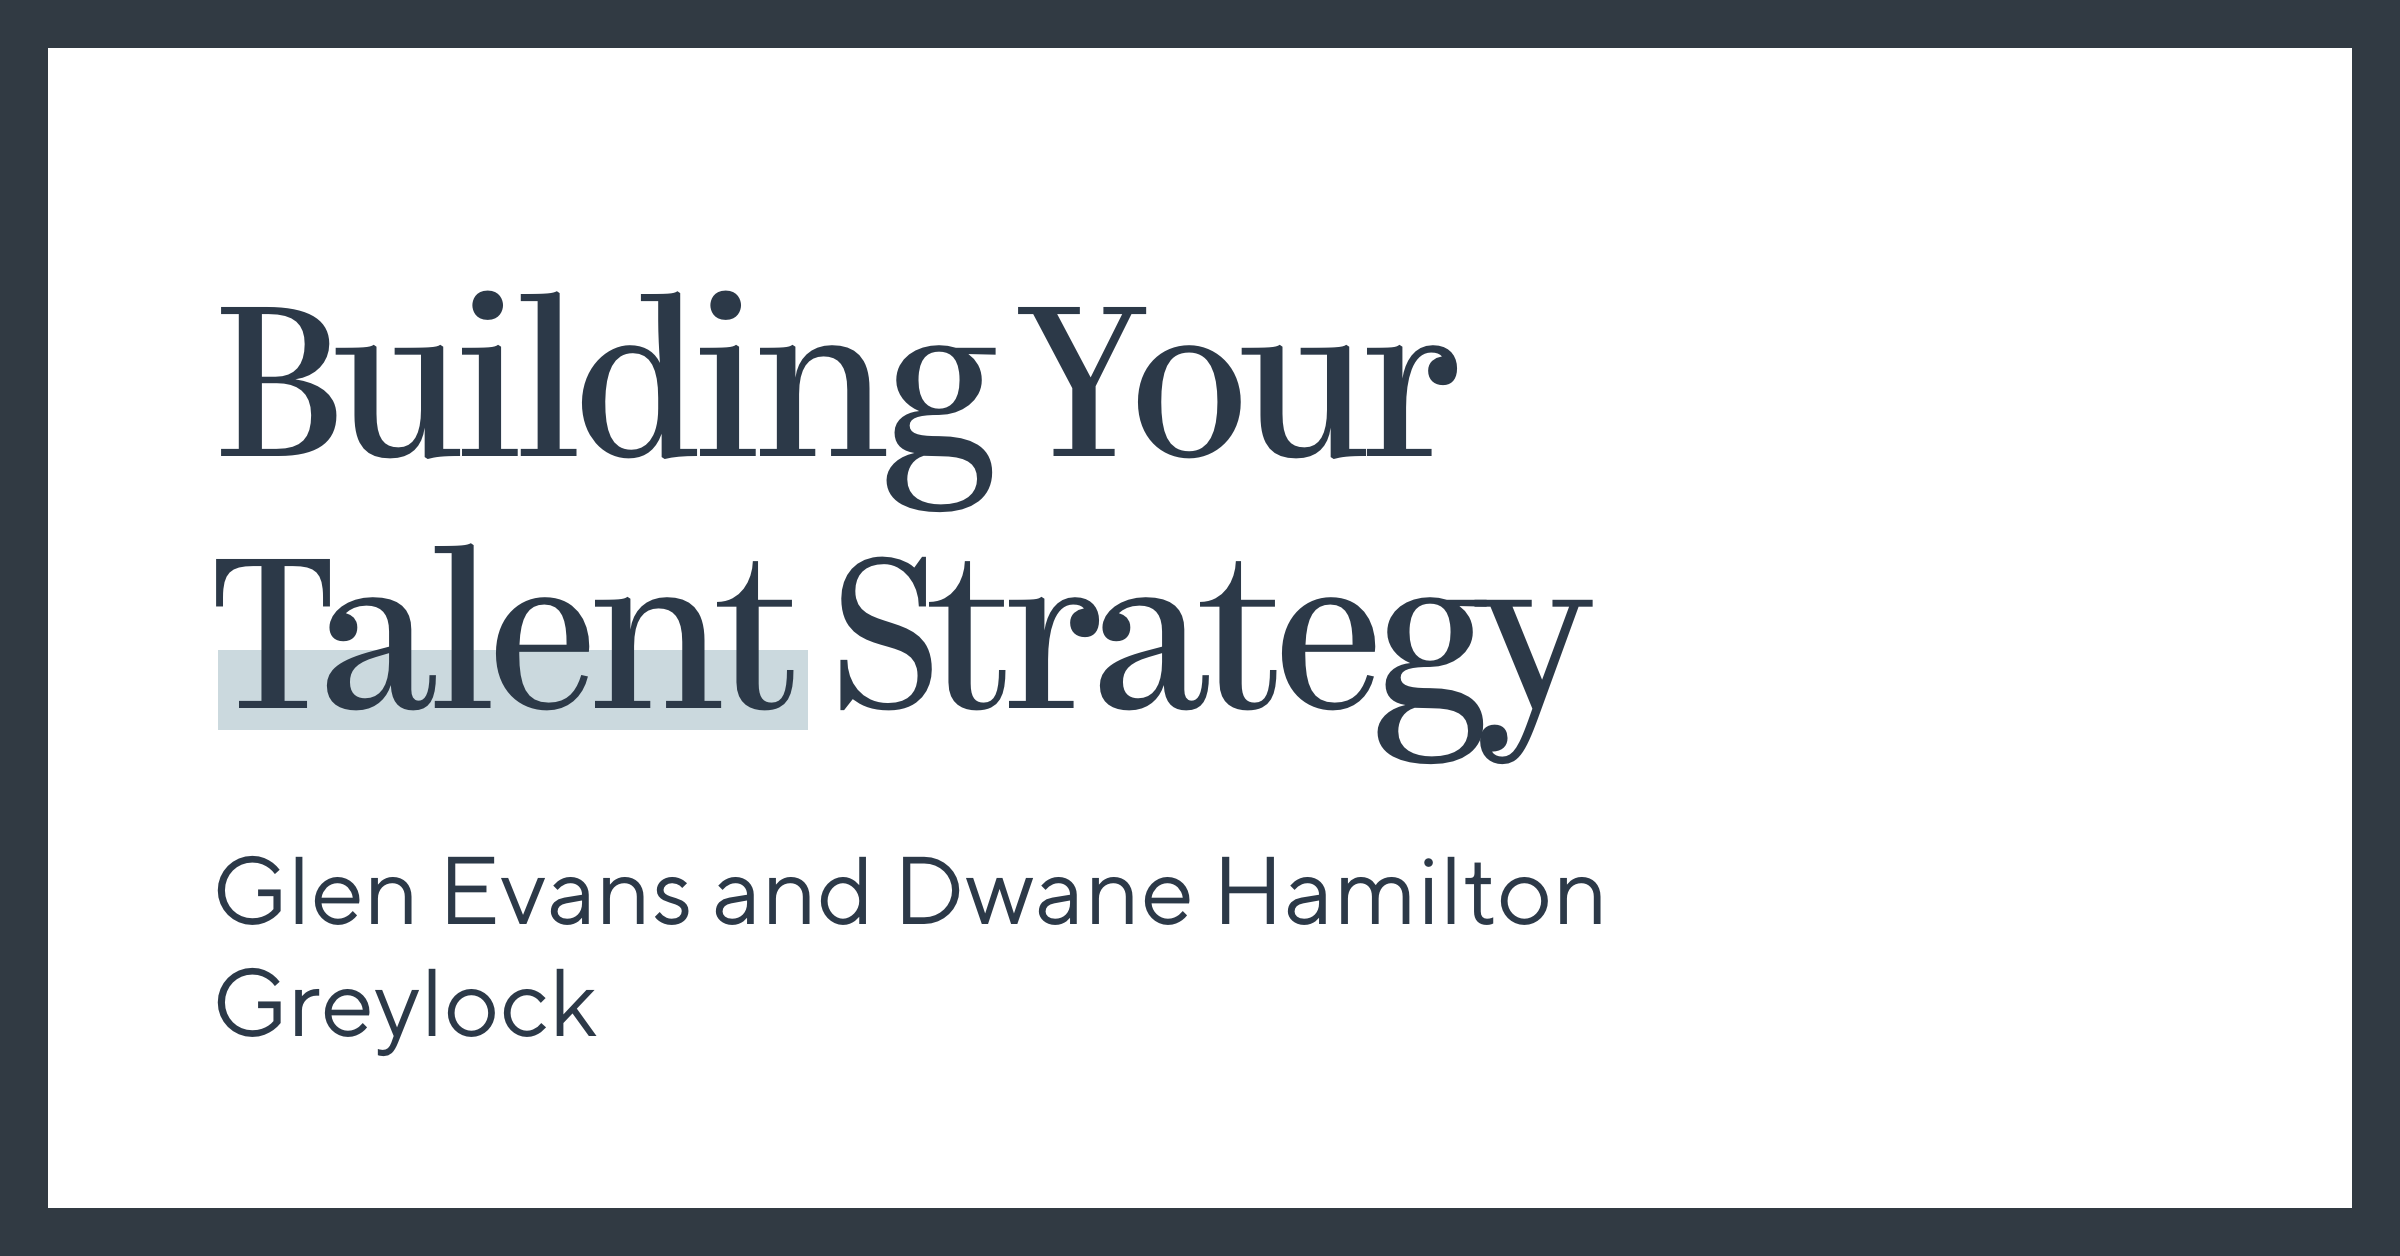 Building Your Talent Strategy